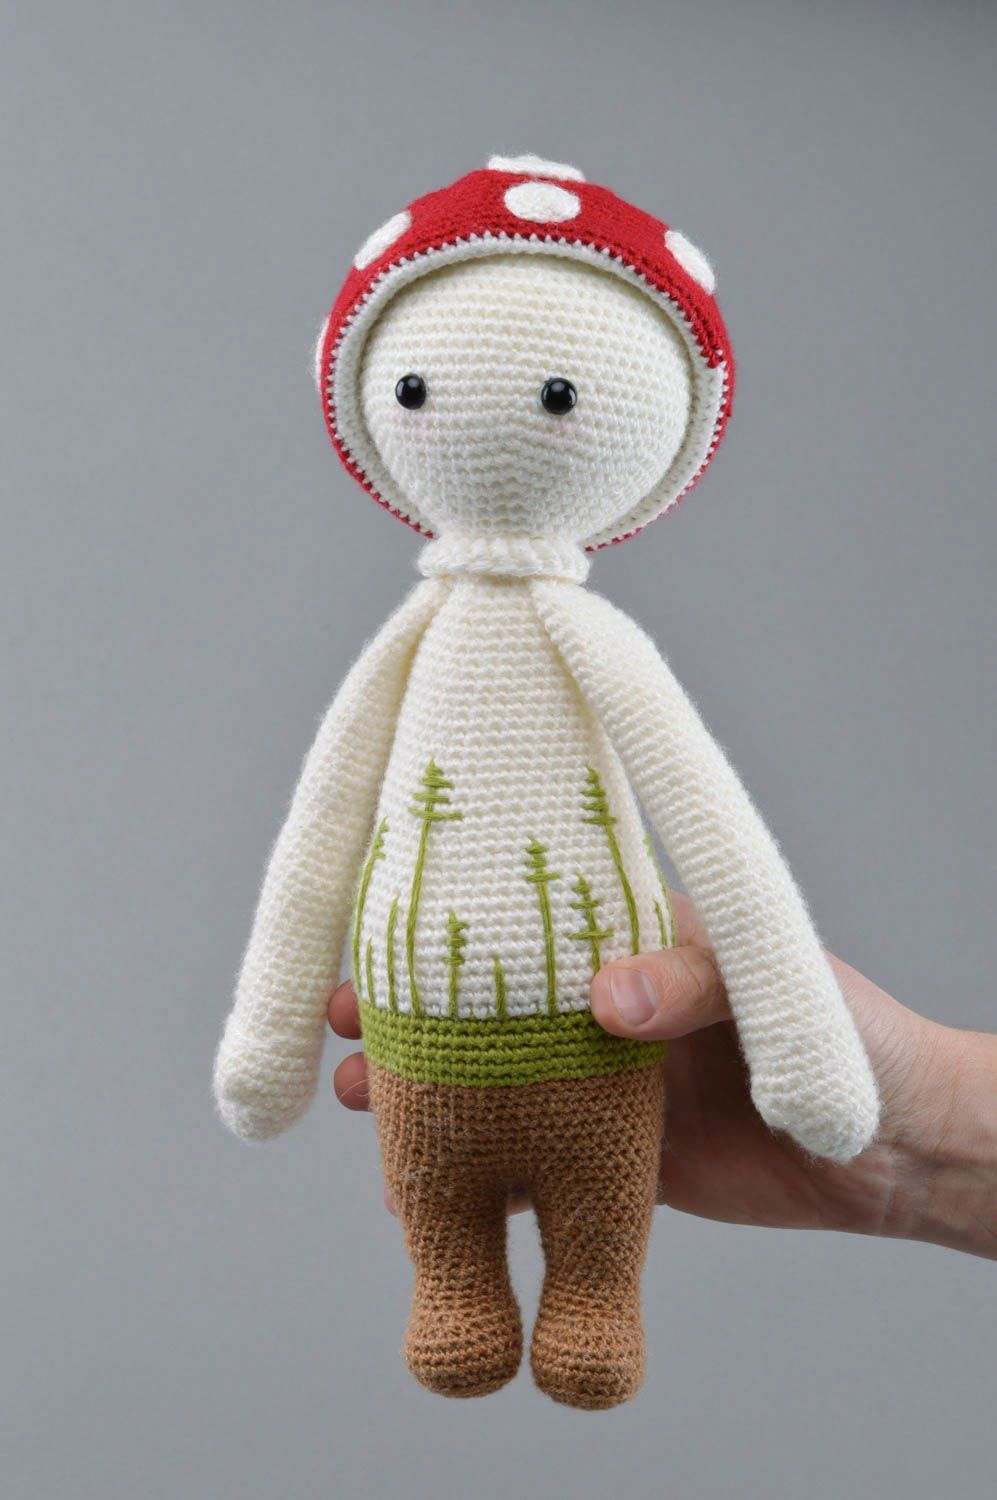 Handmade designer crocheted soft toy sad boy in red and white hat for kids photo 5